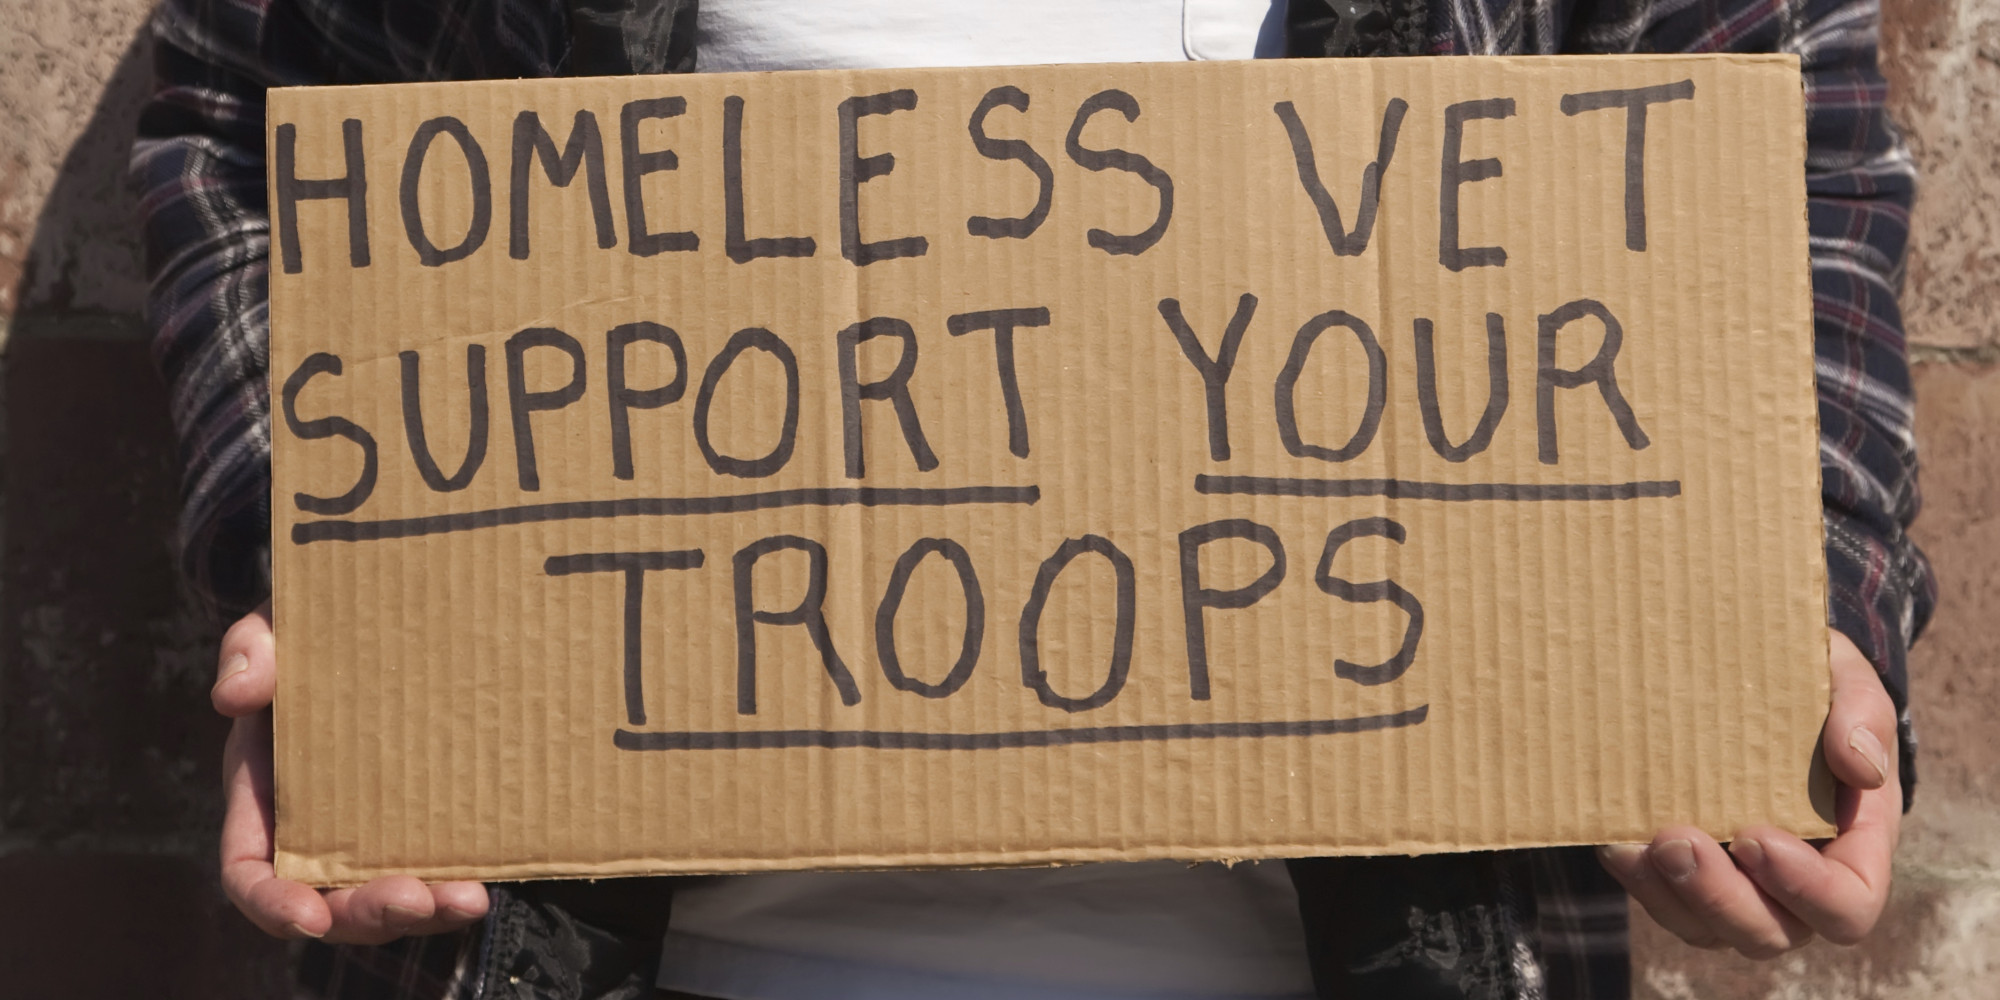 A Call to Help Provide Homeless Veterans in Transition